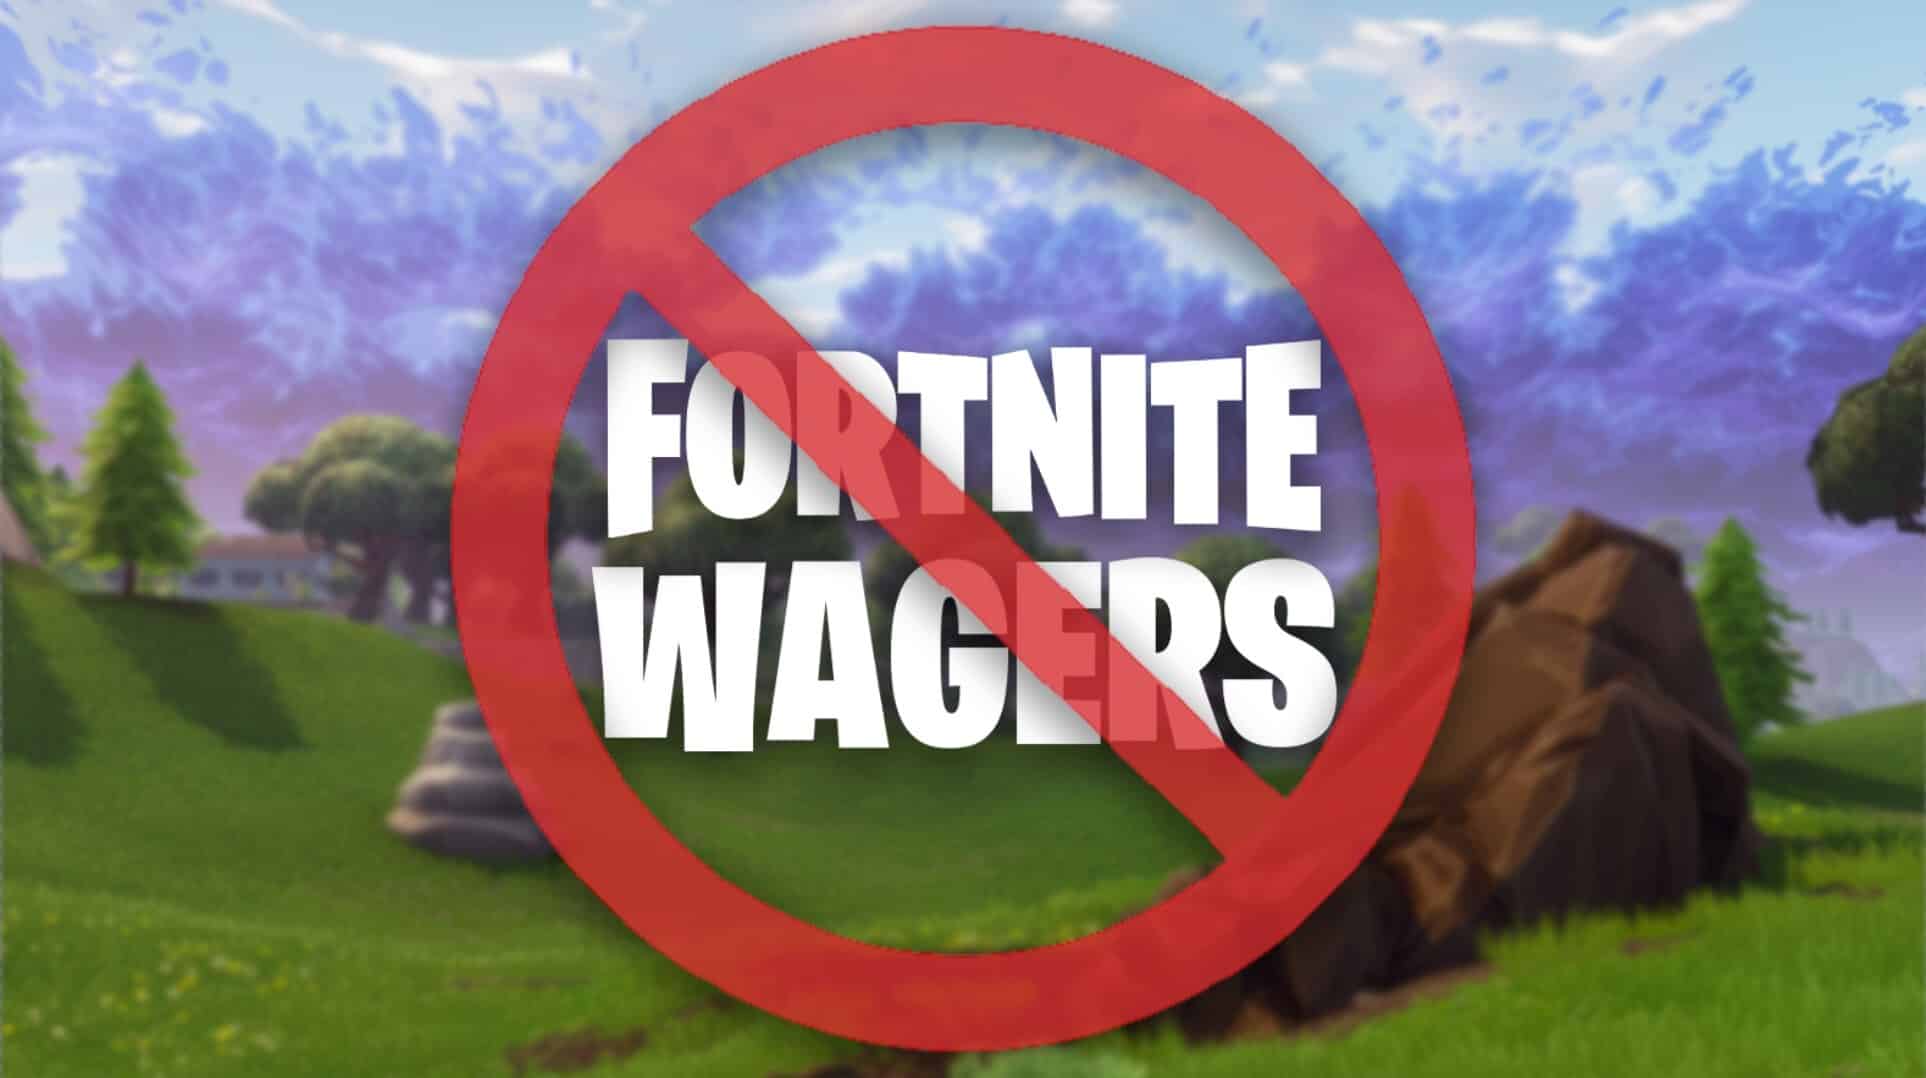 Fortnite banning wagers.